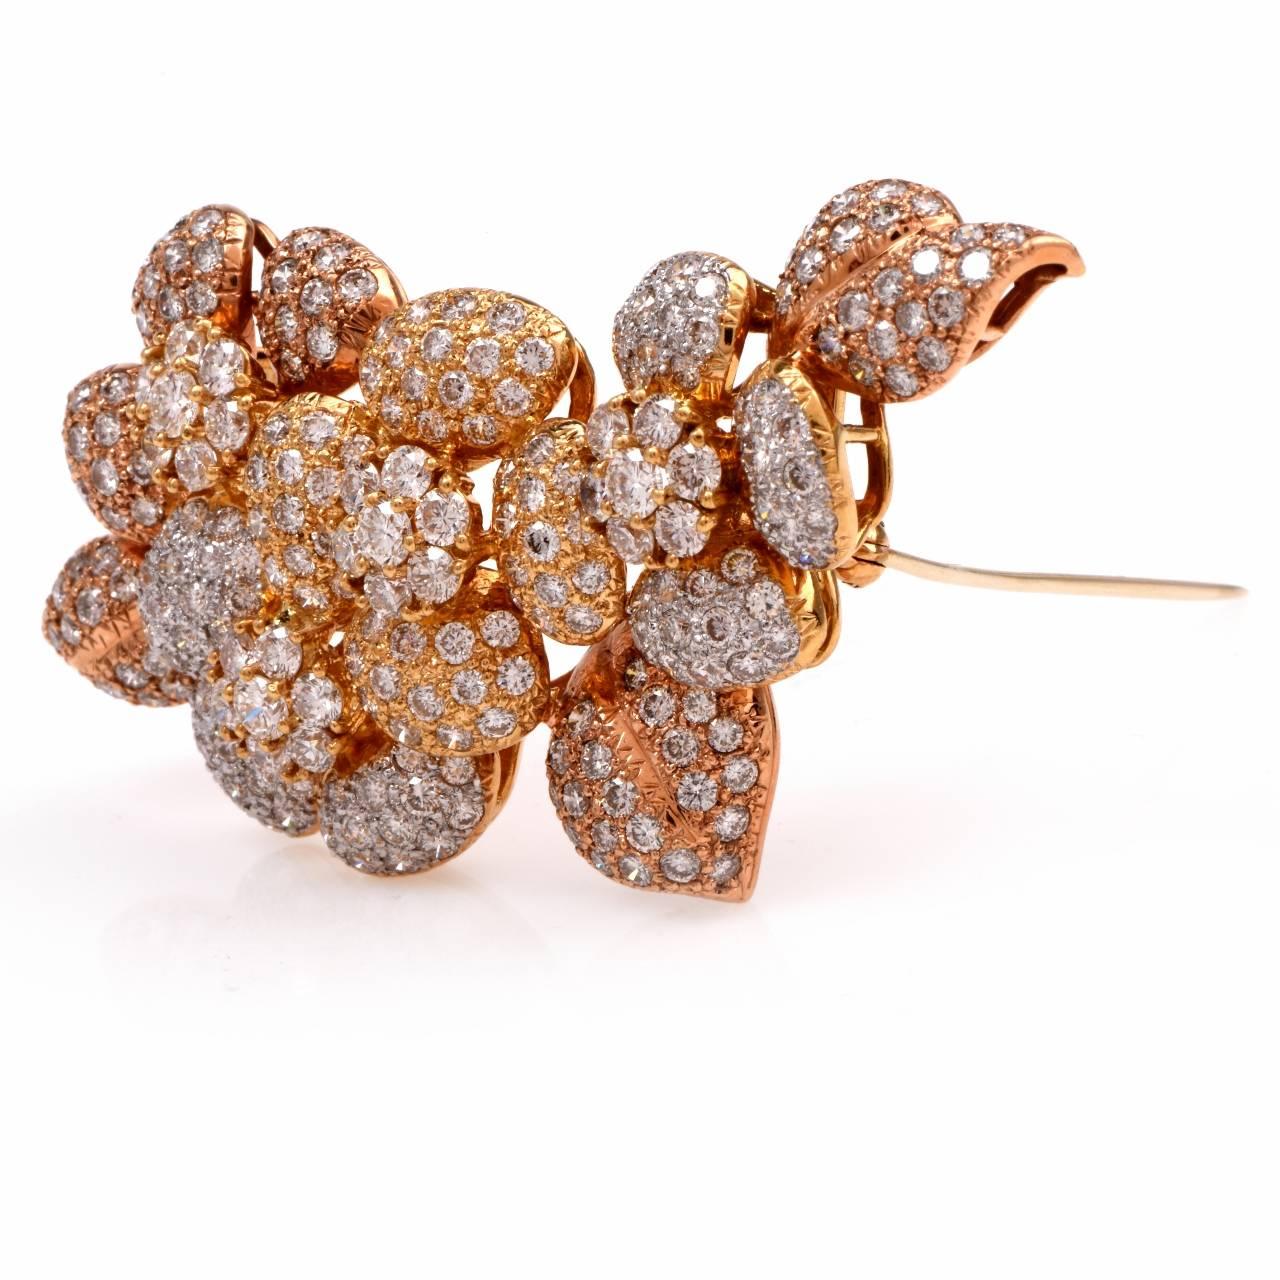 This alluringly estate diamond lapel brooch of unique aesthetics and flexibility is crafted in solid 18K yellow gold, weighing approx: 26.5 grams and measuring approx: 60mm in diameter.  The highly sparkling lapel brooch is completely embellished